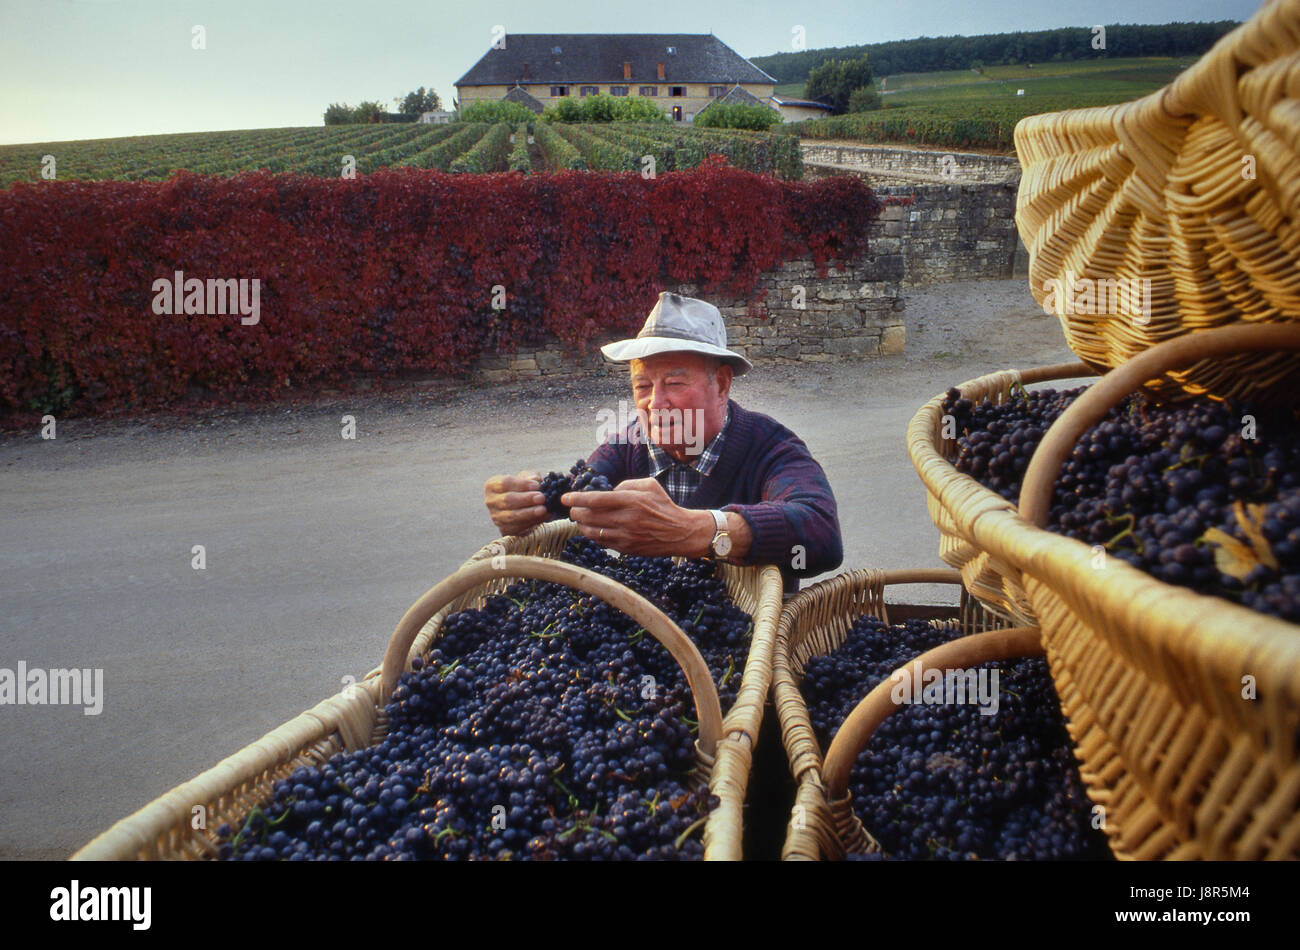 BURGUNDY BASKETS CHARACTER FRENCH MAN PERSON PINOT NOIR GRAPES HARVEST  VENDANGES HARVESTER GRAPE PICKER CHARACTER BASKETS Traditional Burgundian  baskets of harvested Pinot Noir grapes outside Louis Latour Château de  Grancey winery, with